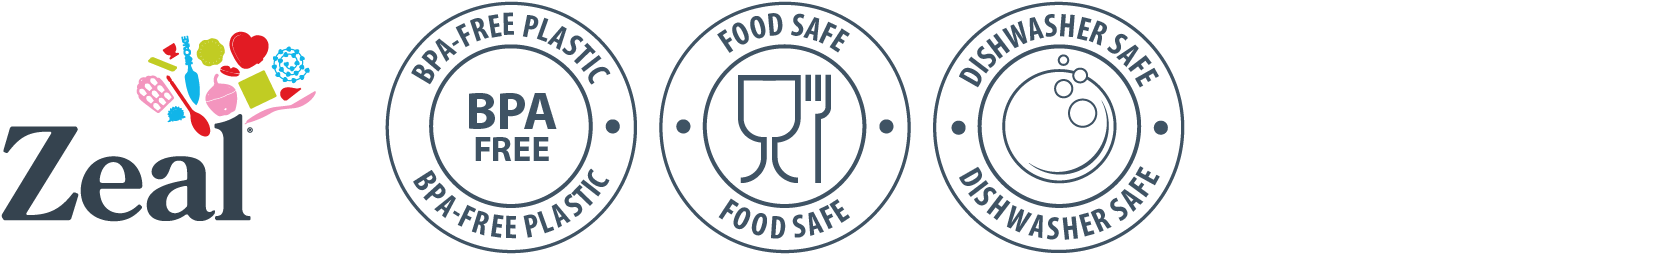 Zeal Food Safe icons